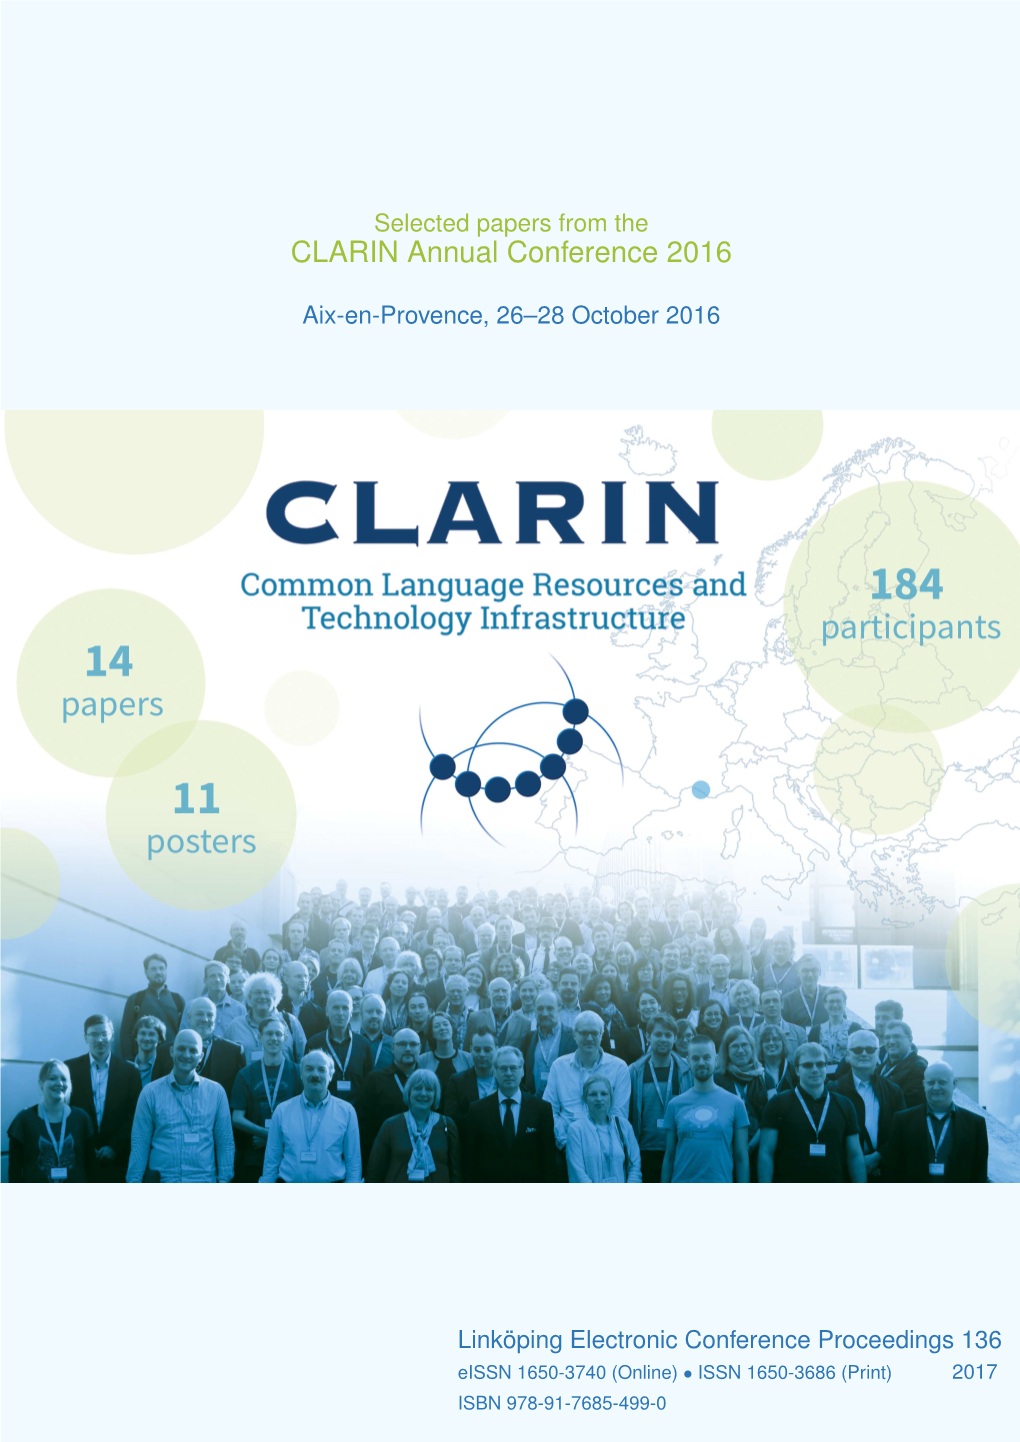 CLARIN Annual Conference 2016